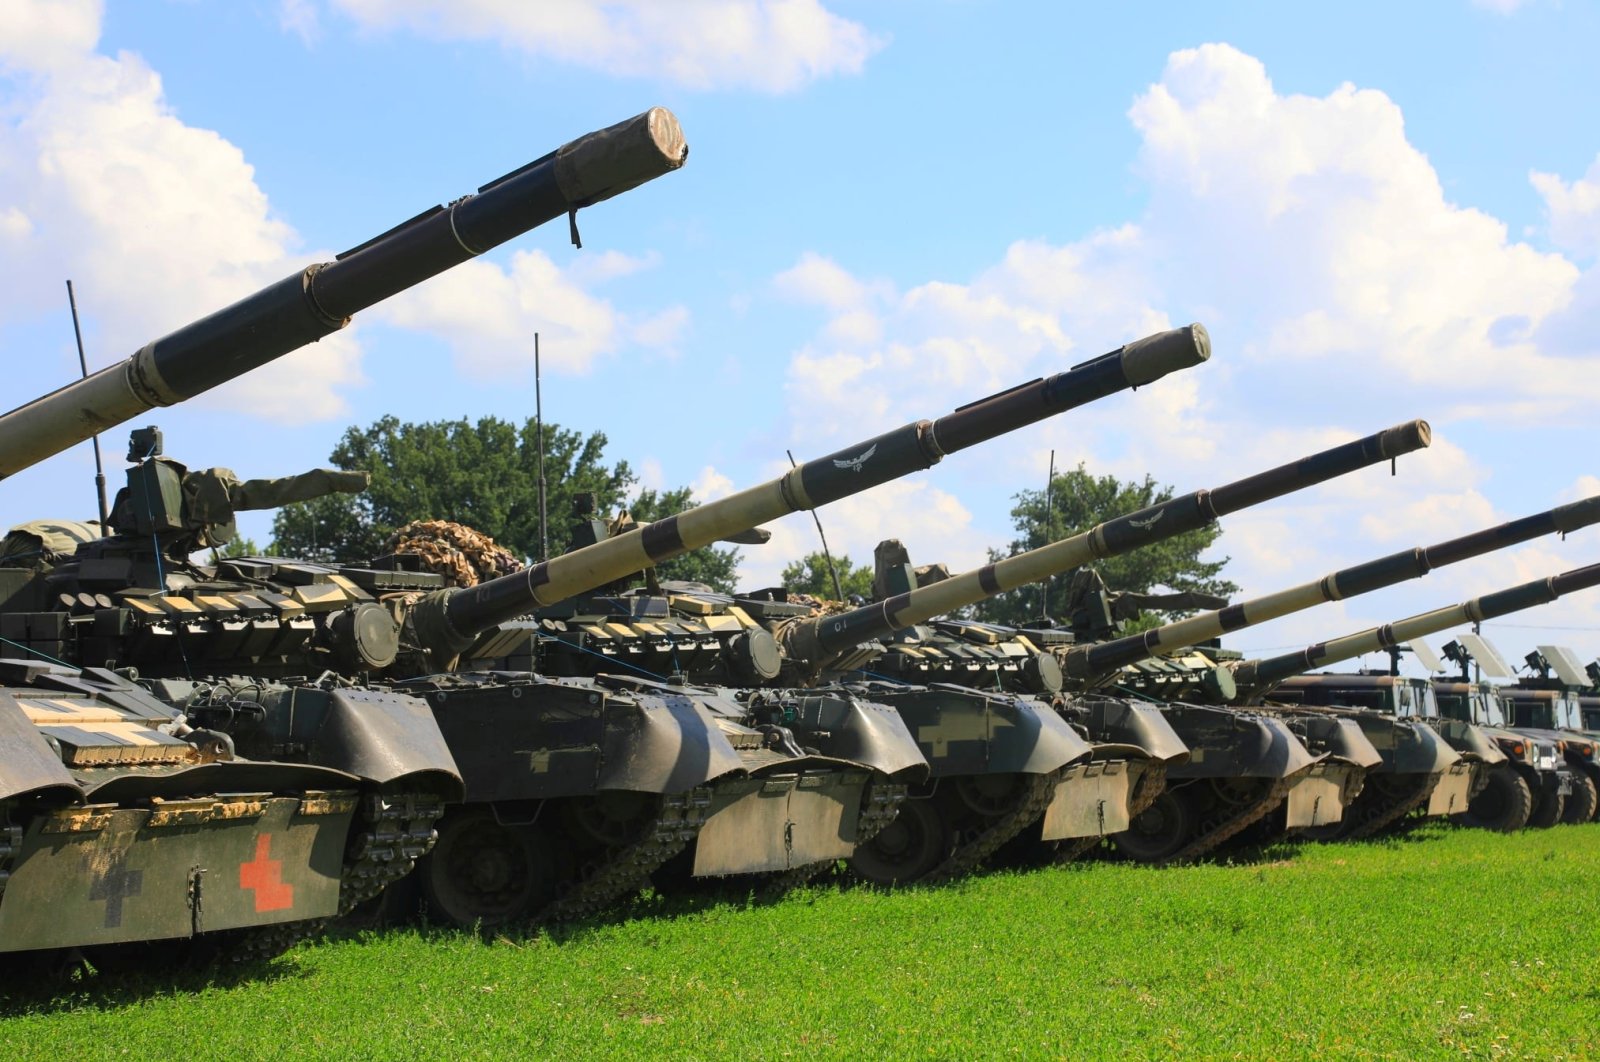 Tanks belonging to the Ukrainian Air Assault Forces are seen during the opening ceremony for the Sea Breeze multinational maritime exercise, Kherson, Ukraine, June 28, 2021. (Ukrainian Naval Forces via Reuters)